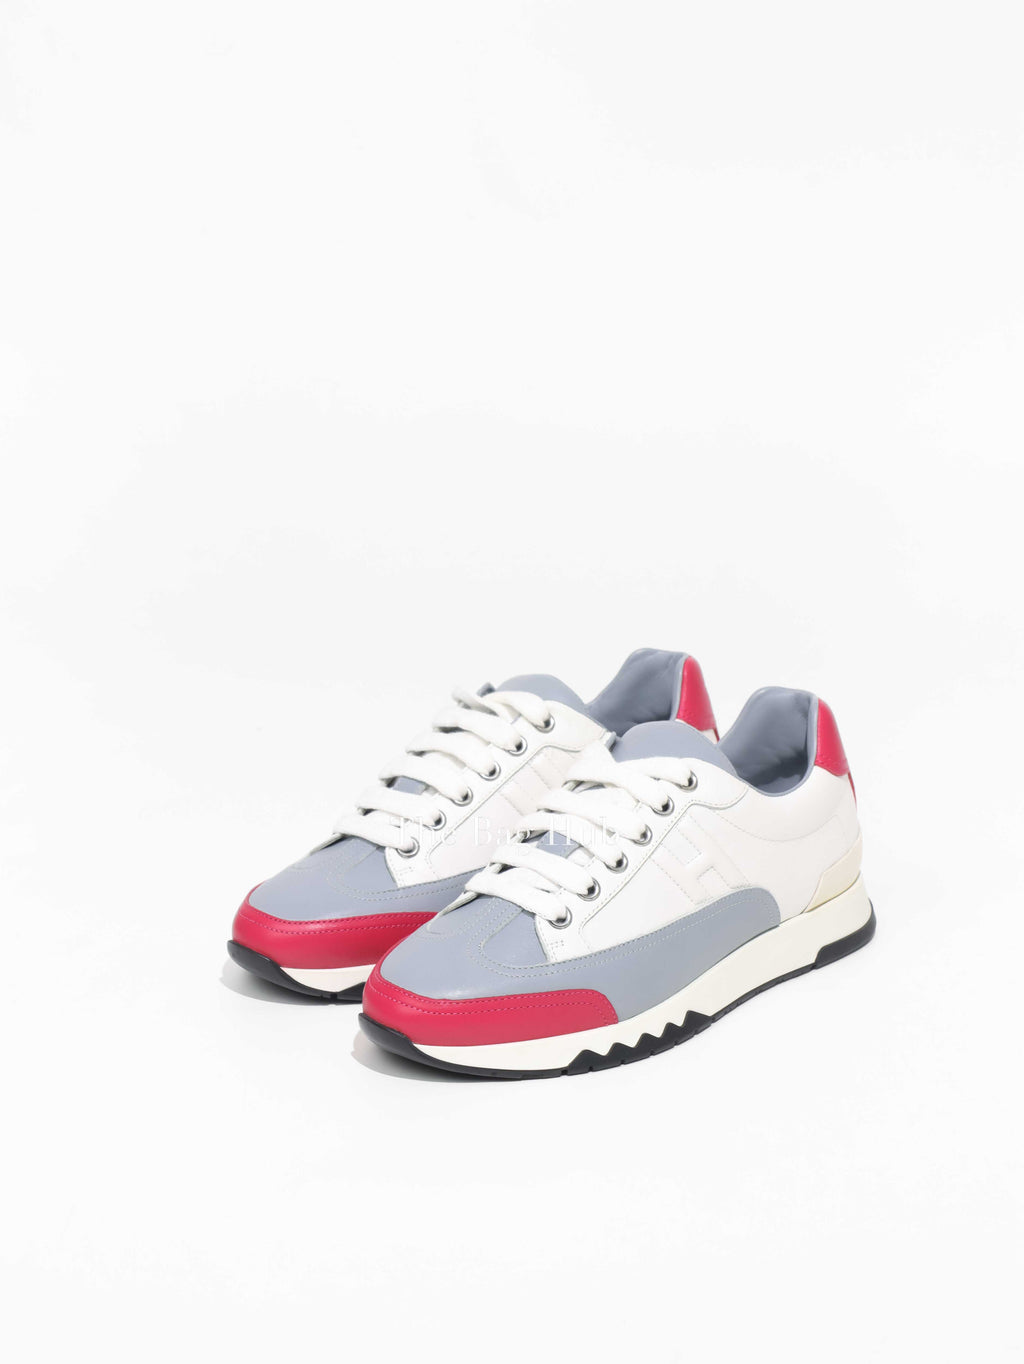 Hermes White/Grey/Pink Leather Women Trail Sneakers Size 35.5